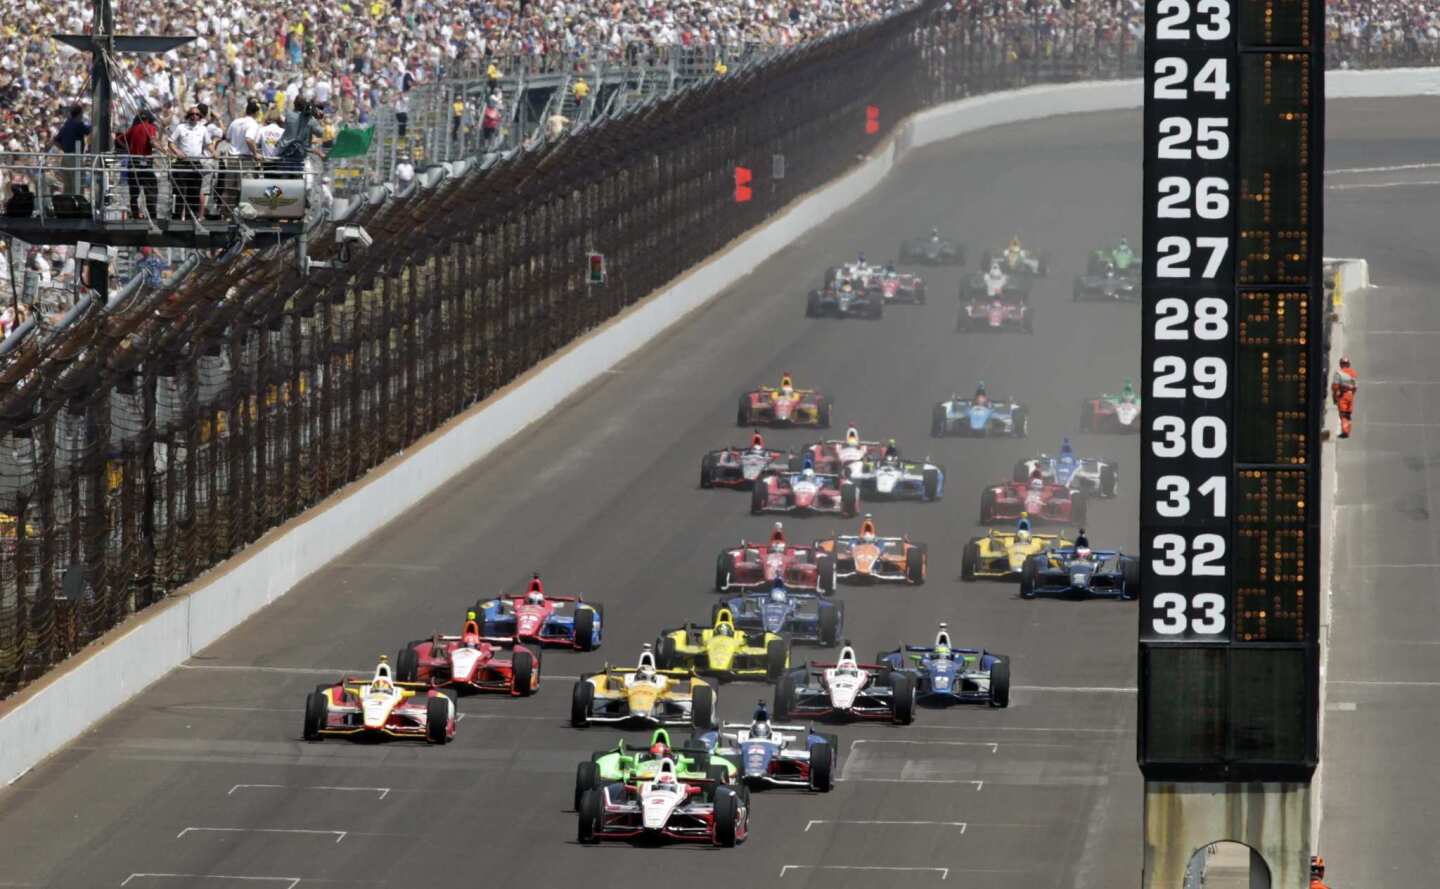 Pole-sitter Ryan Briscoe leads the field across the start/finish line to begin the 96th running of the Indianapolis 500 on Sunday.